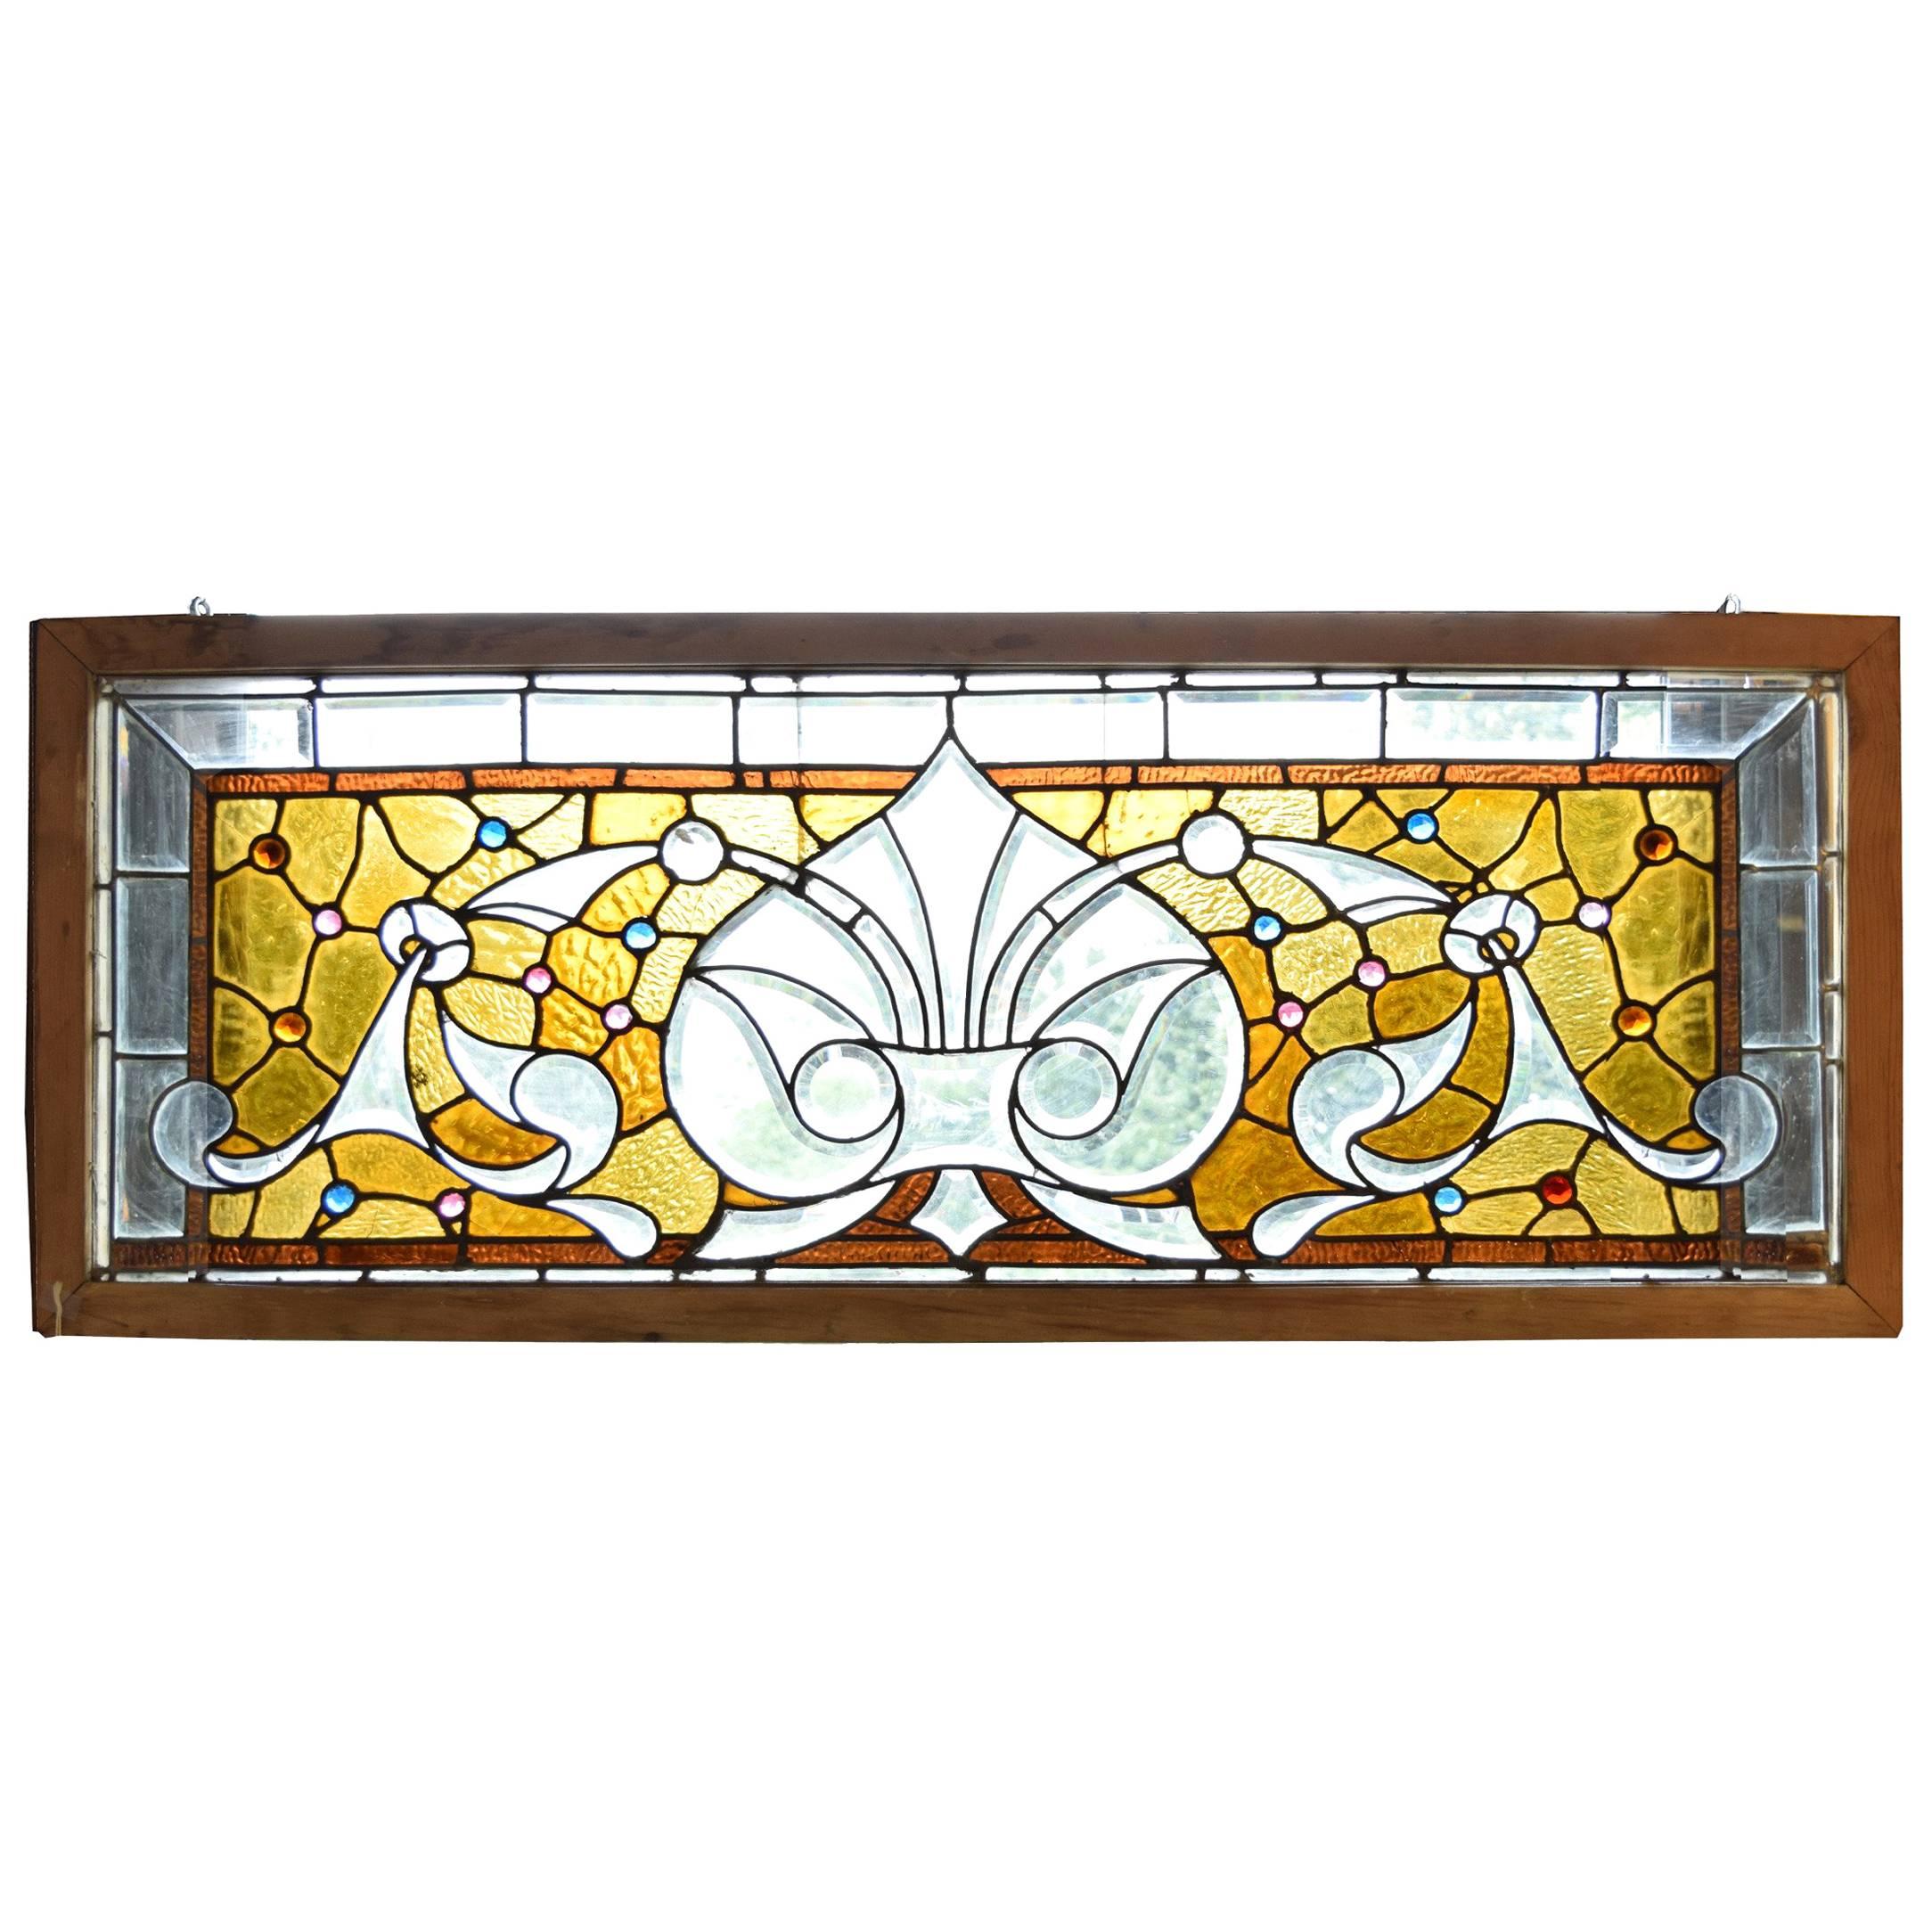 American Stained and Beveled Glass Window